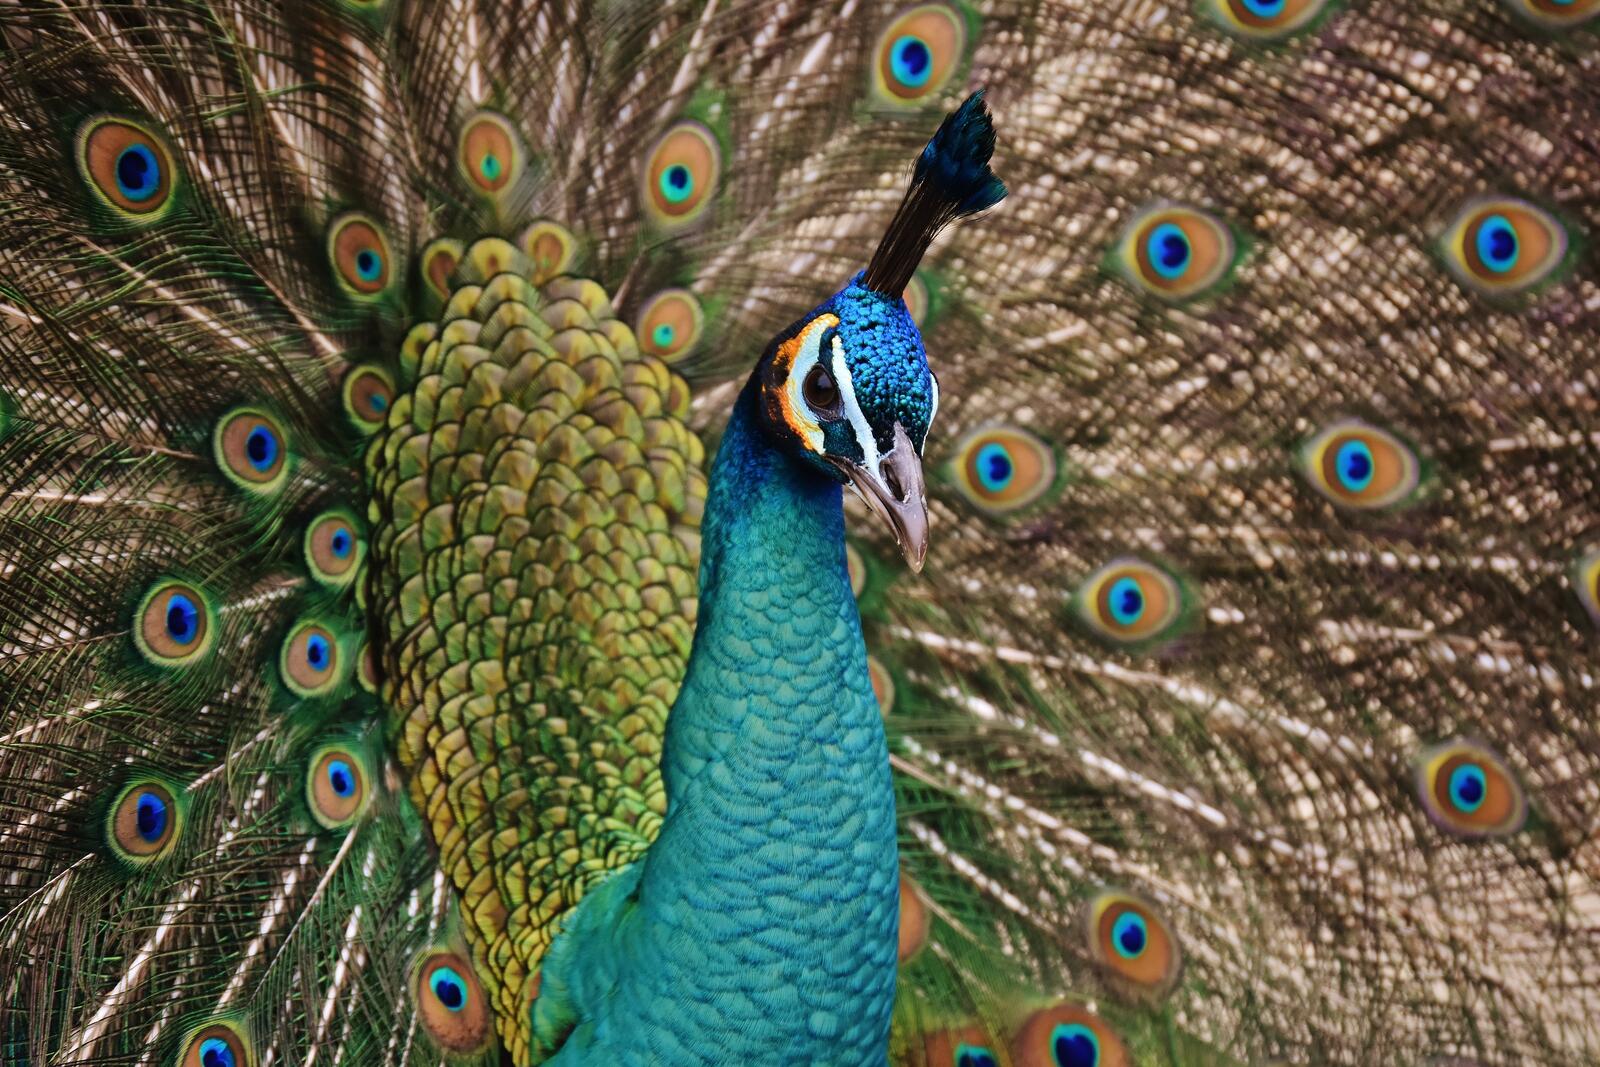 Wallpapers colorful peacock galliformes on the desktop